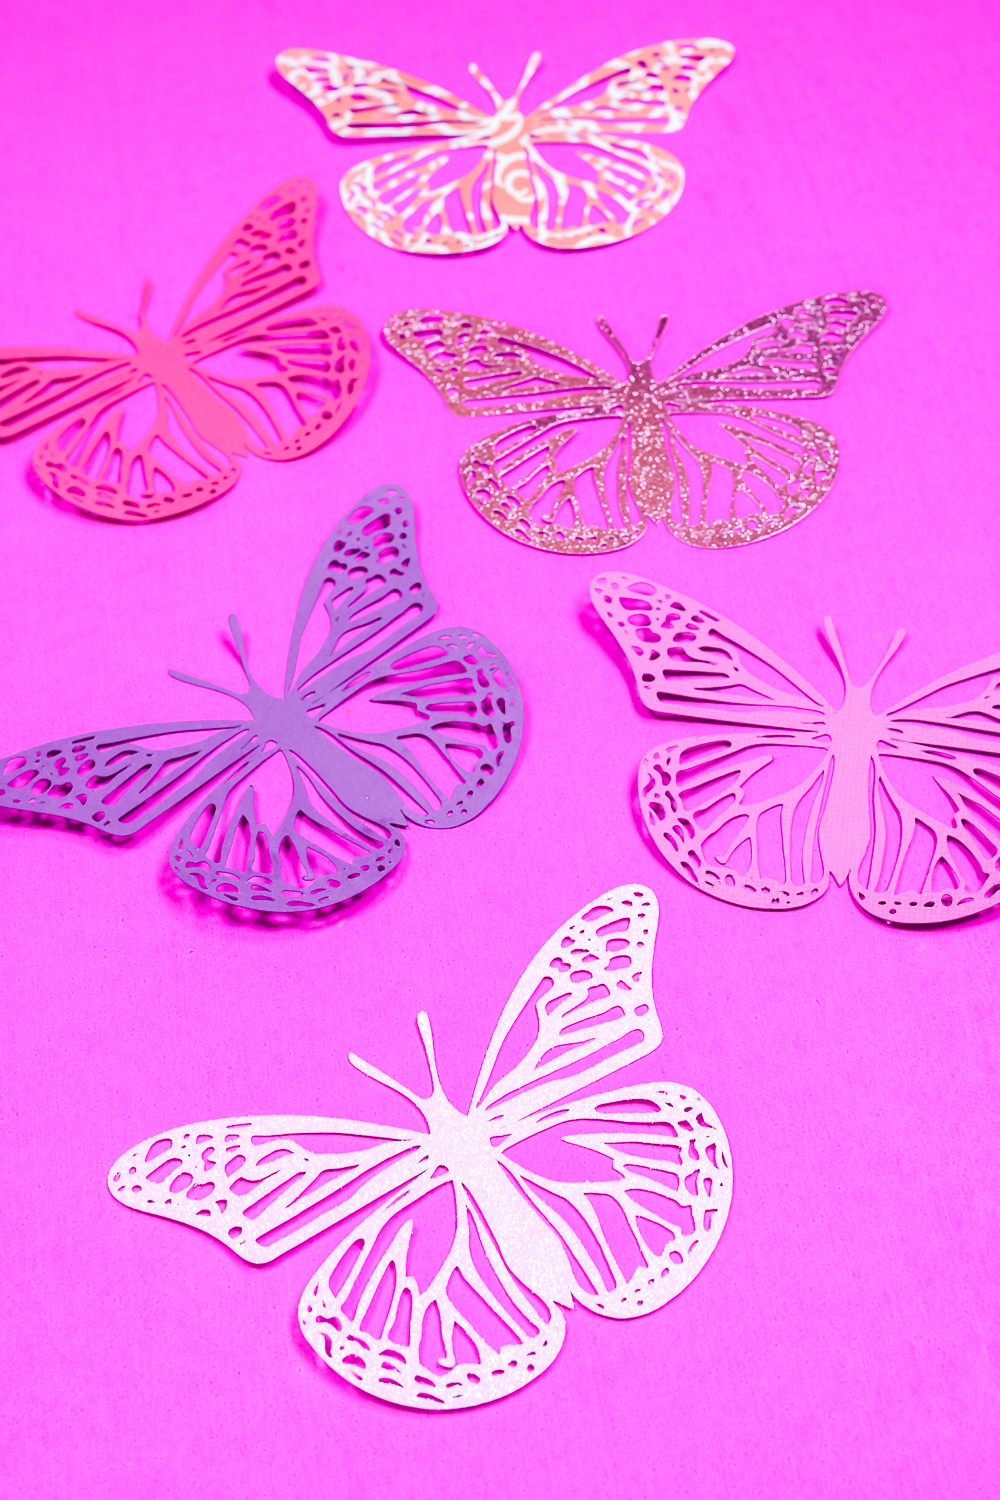 Finished intricate cut cardstock butterflies - vertical.